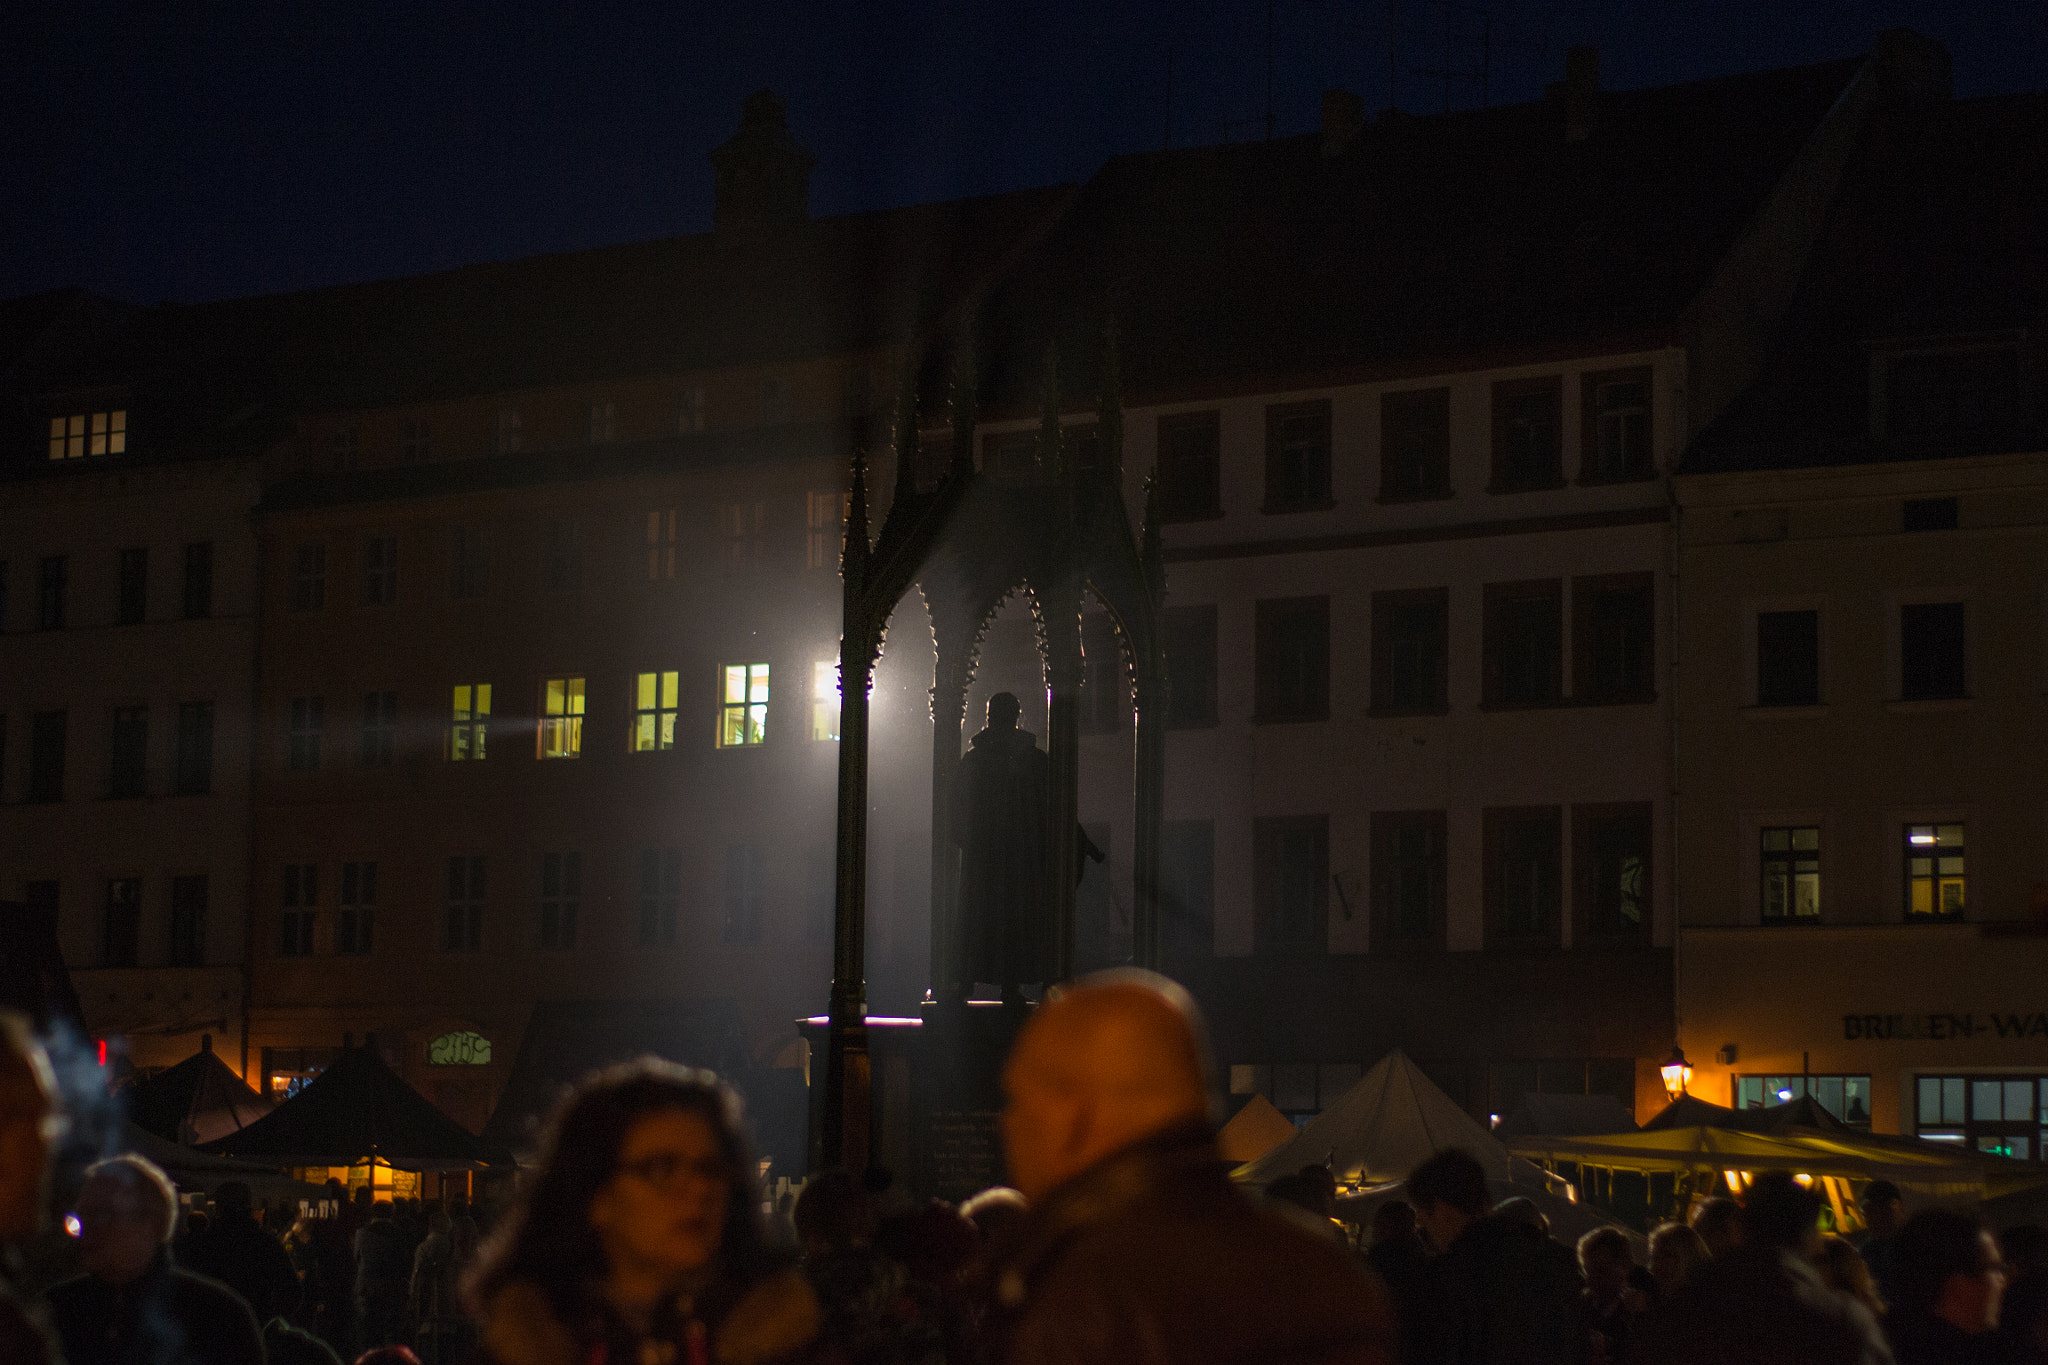 Nikon D3100 + AF-S DX VR Zoom-Nikkor 18-55mm f/3.5-5.6G + 2.8x sample photo. Wittenberg at night photography